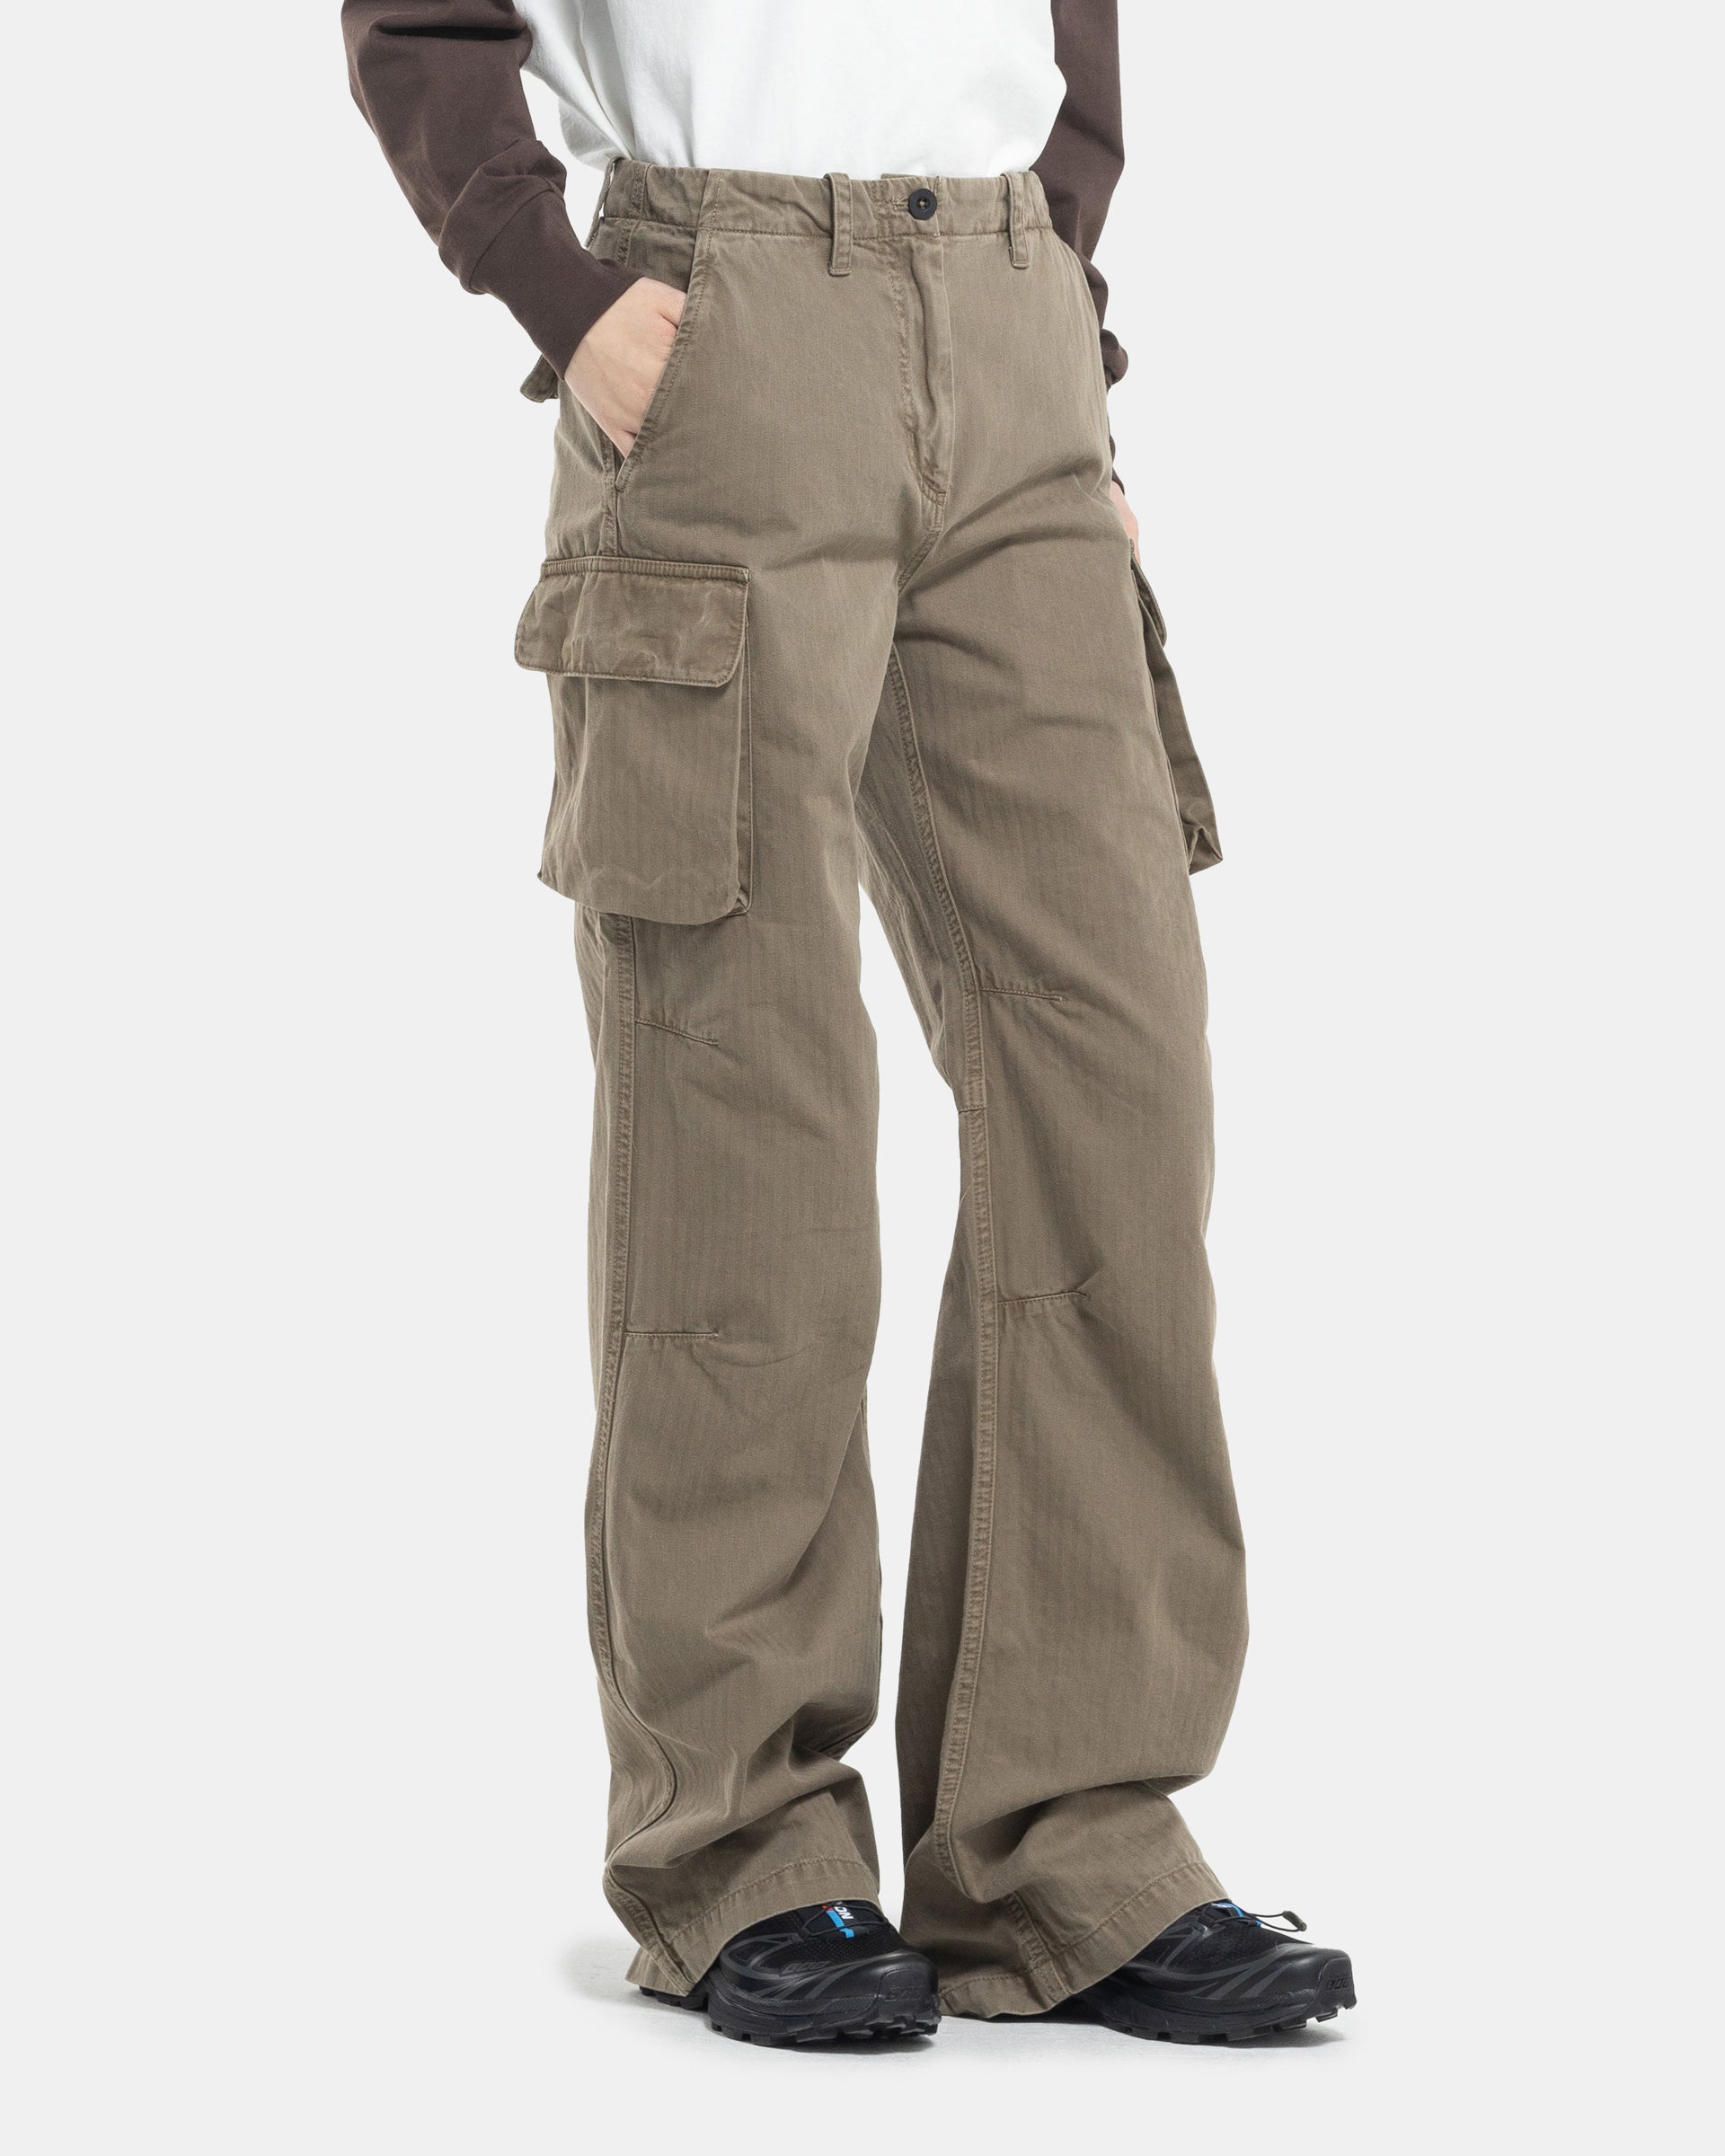 Khaki Cargo Pant from Our Legacy on white background